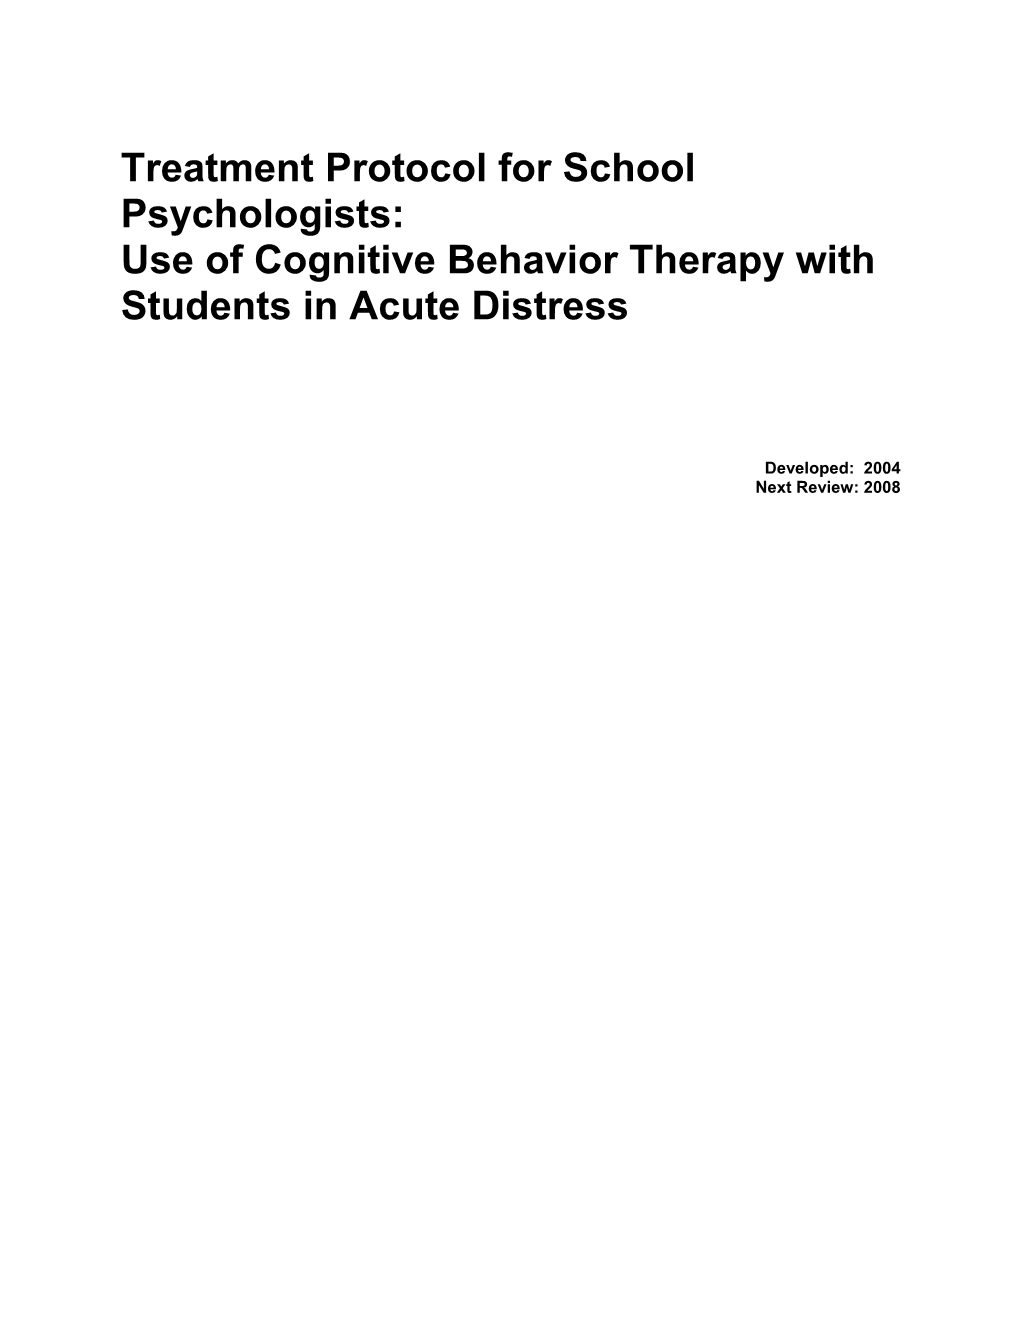 Development of Guidelines for Treatment Protocol